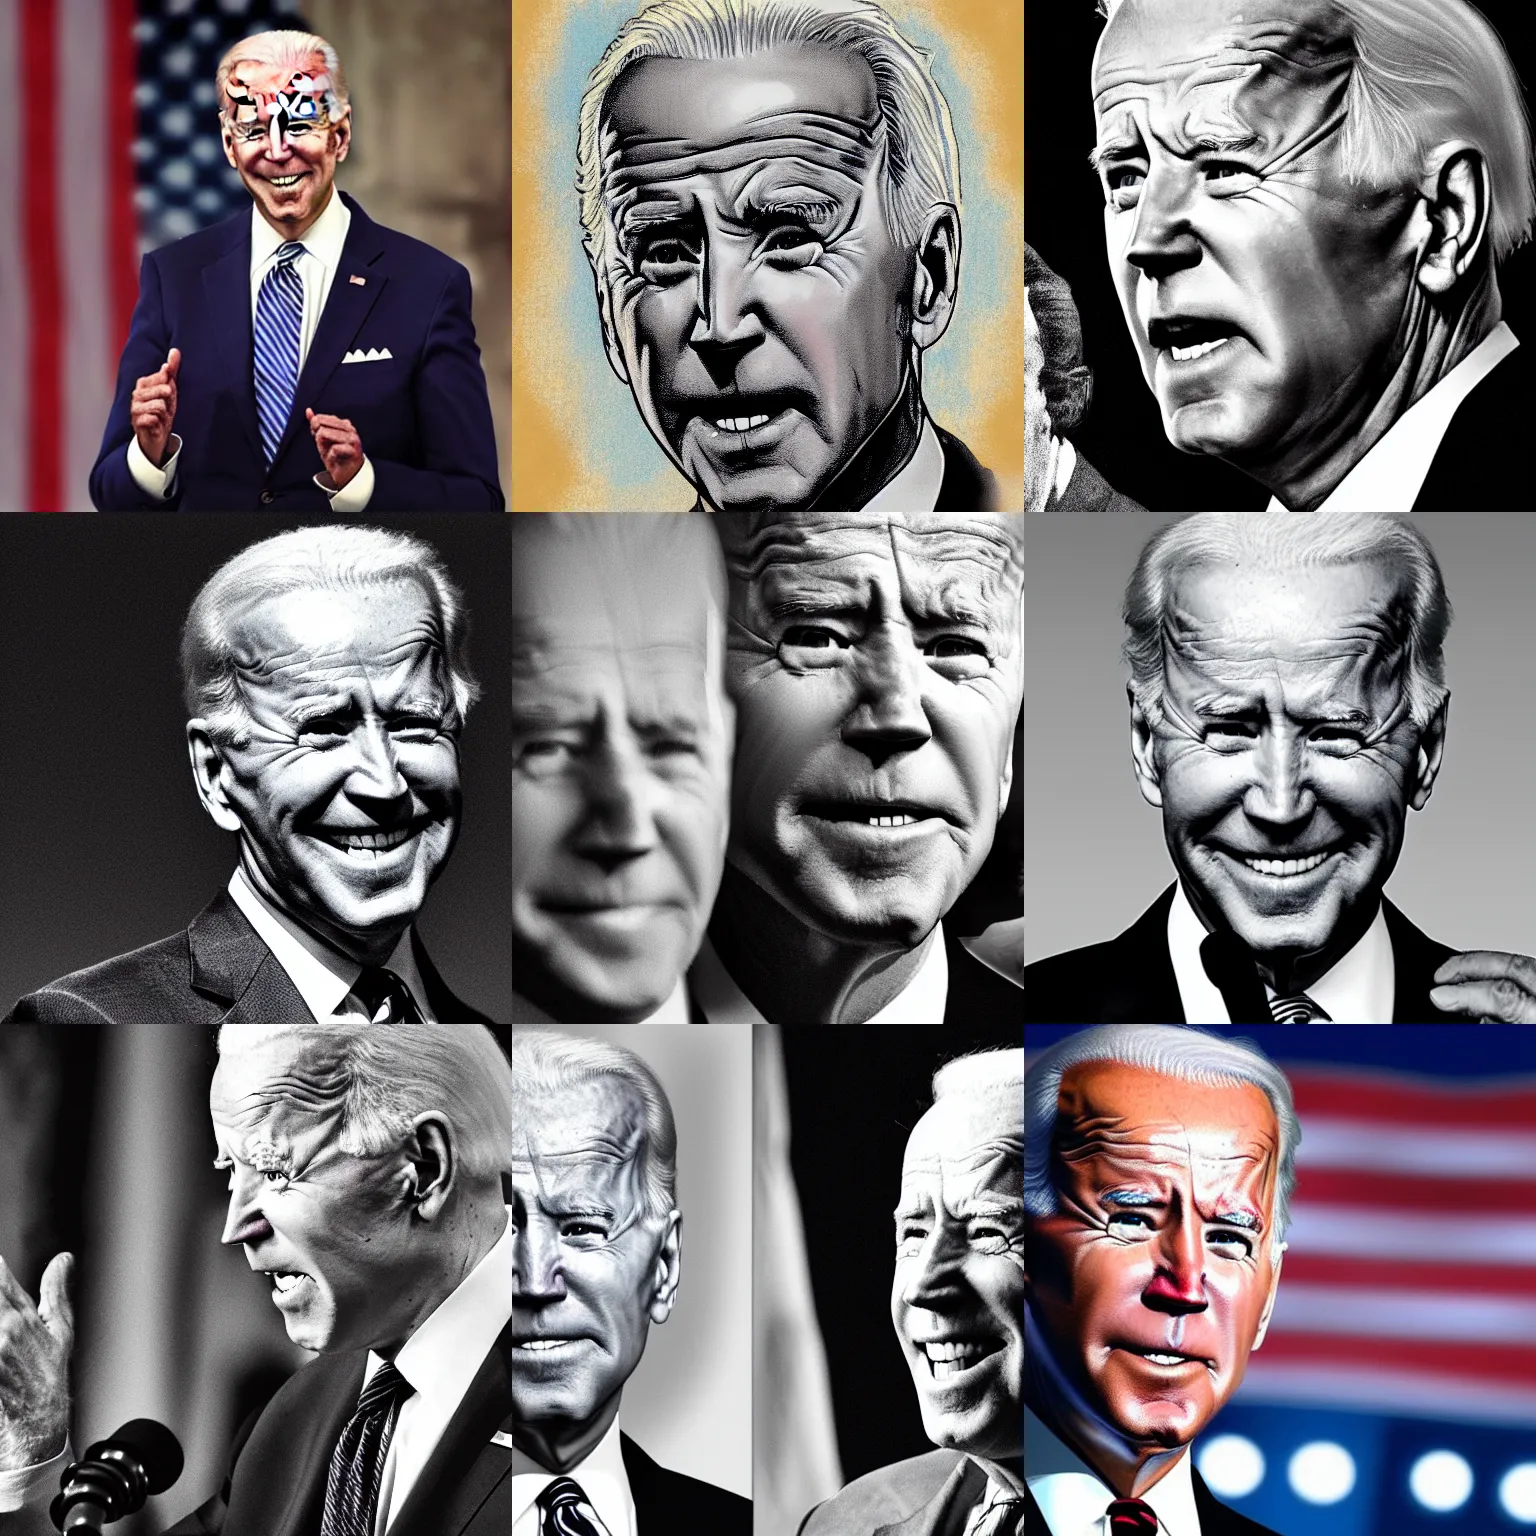 Prompt: Joe Biden is your friend, in the style of Scary Stories to Tell in the Dark